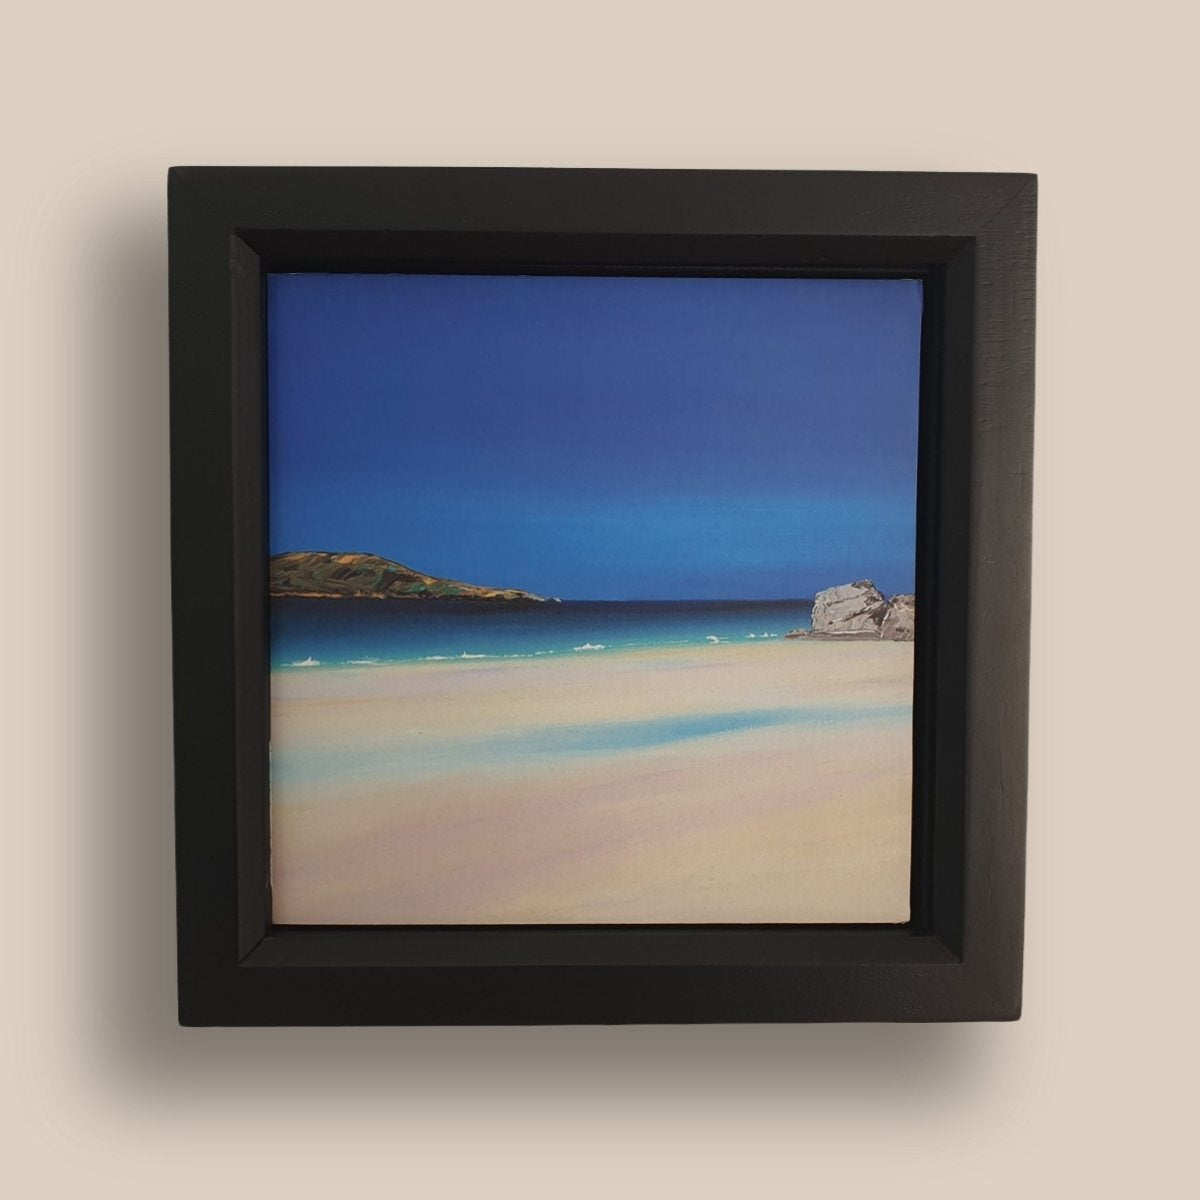 Printed image of a beach on the Isle of Tiree, Scottish Hebrides.